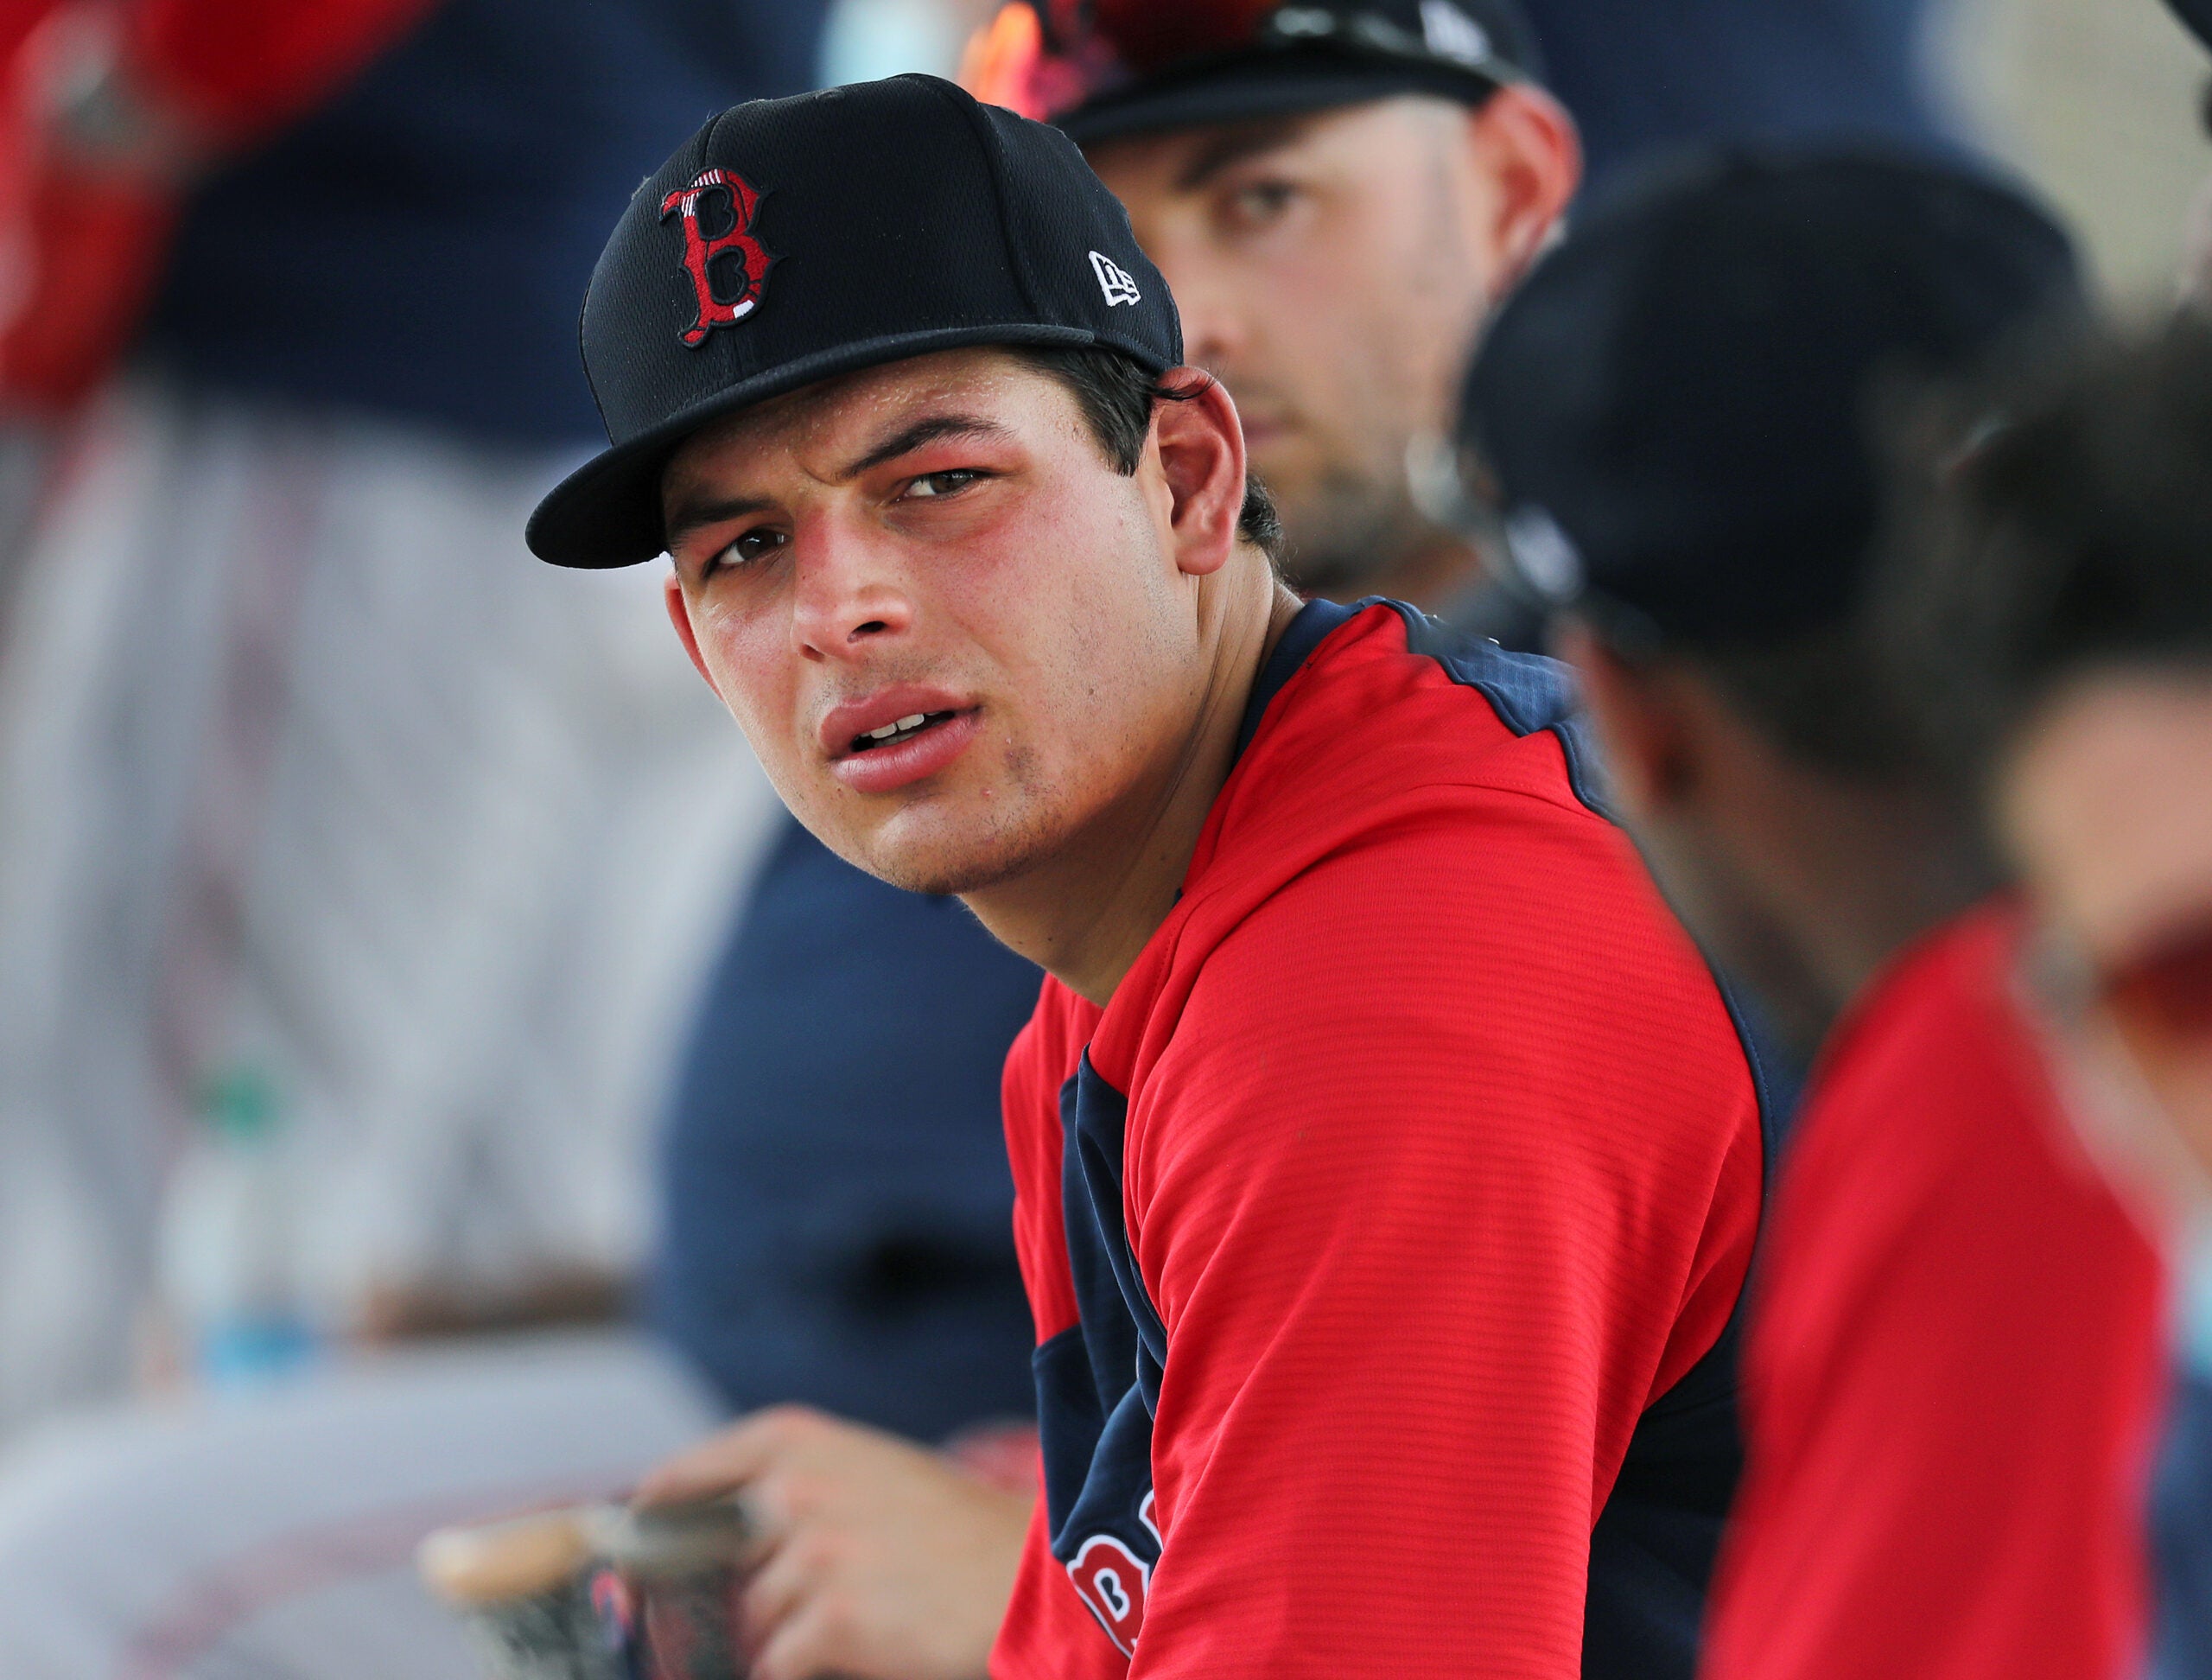 Red Sox infield prospect Nick Yorke is pictured in a dugout during a simulated game.